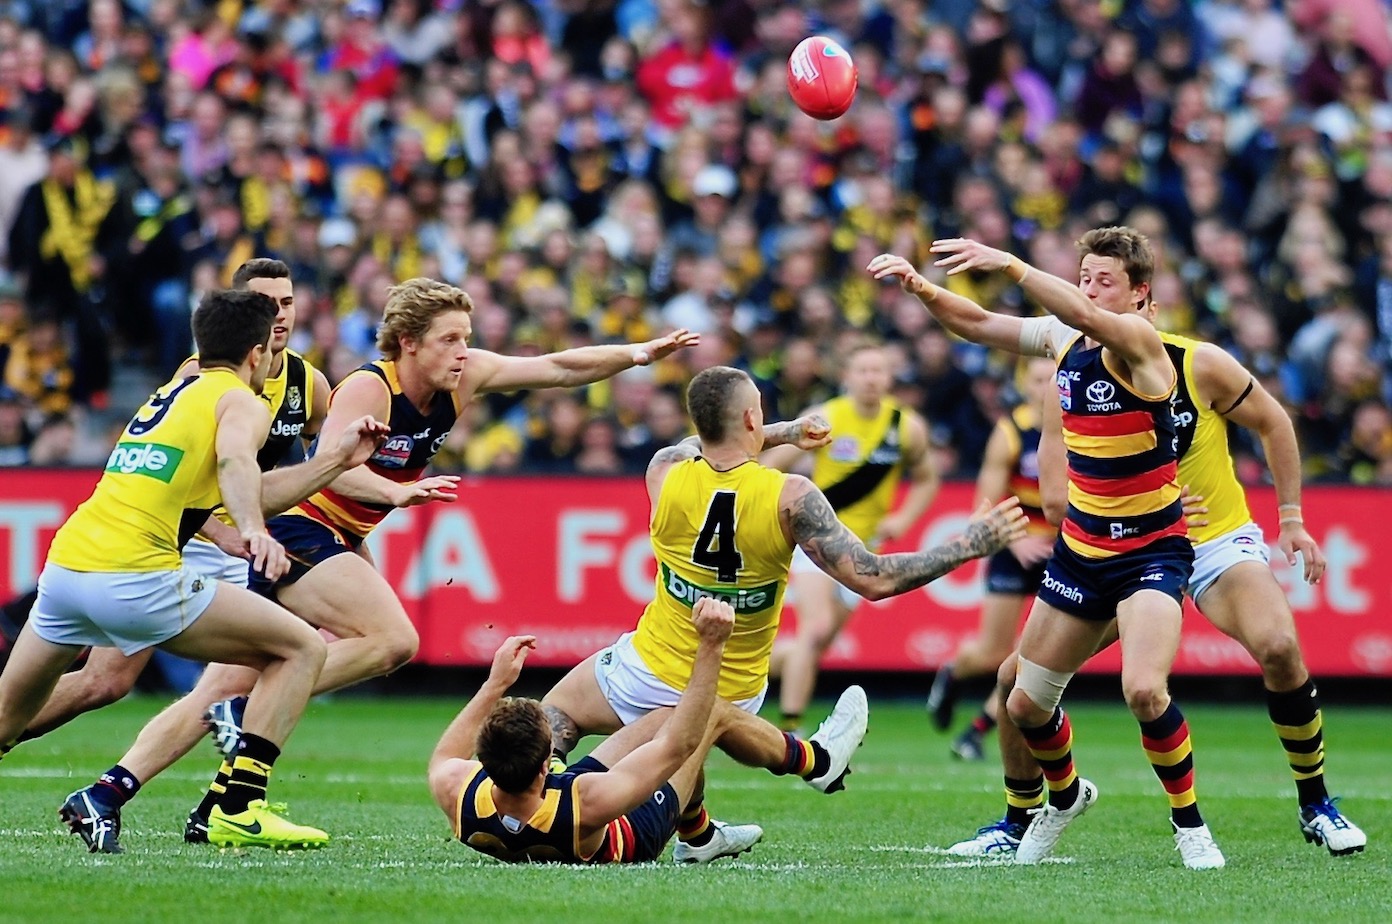 Brad Crouch tackles Dusty as brother Matt and Sloane reach for the sherrin. Photo by Kim Densham for AFANA.